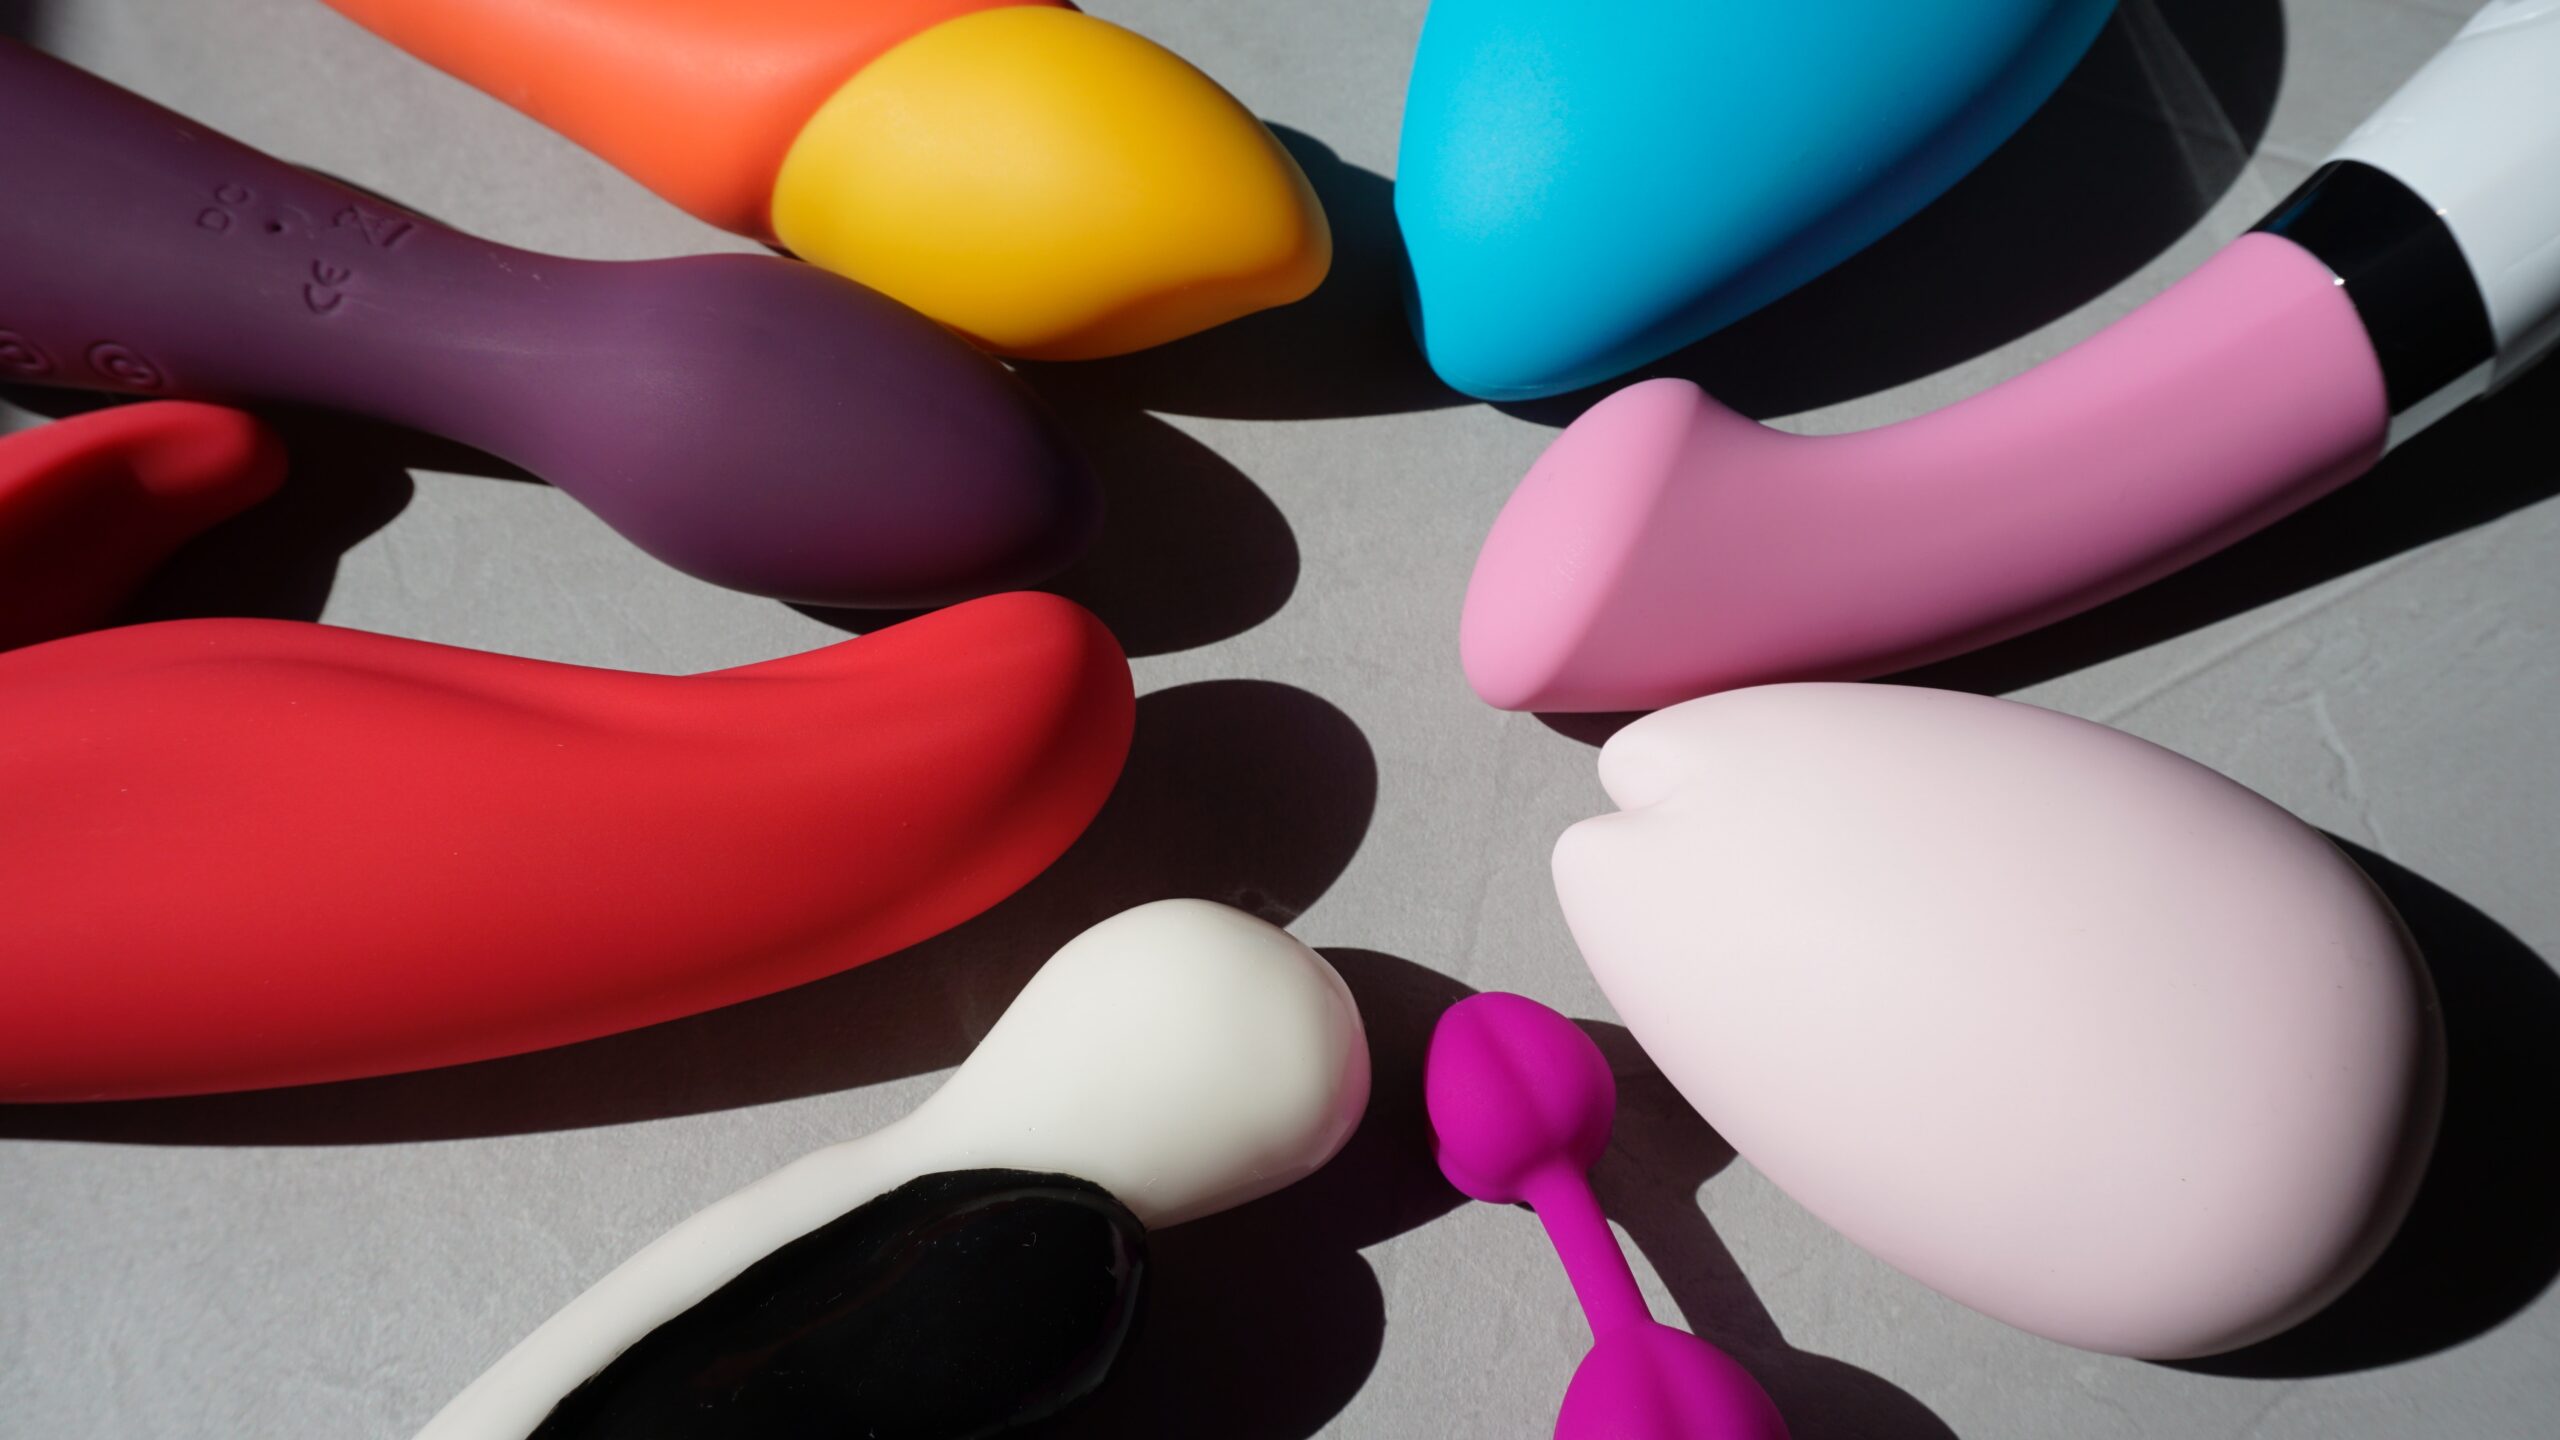 The Features of the Most Popular Sex Toys Might Surprise You